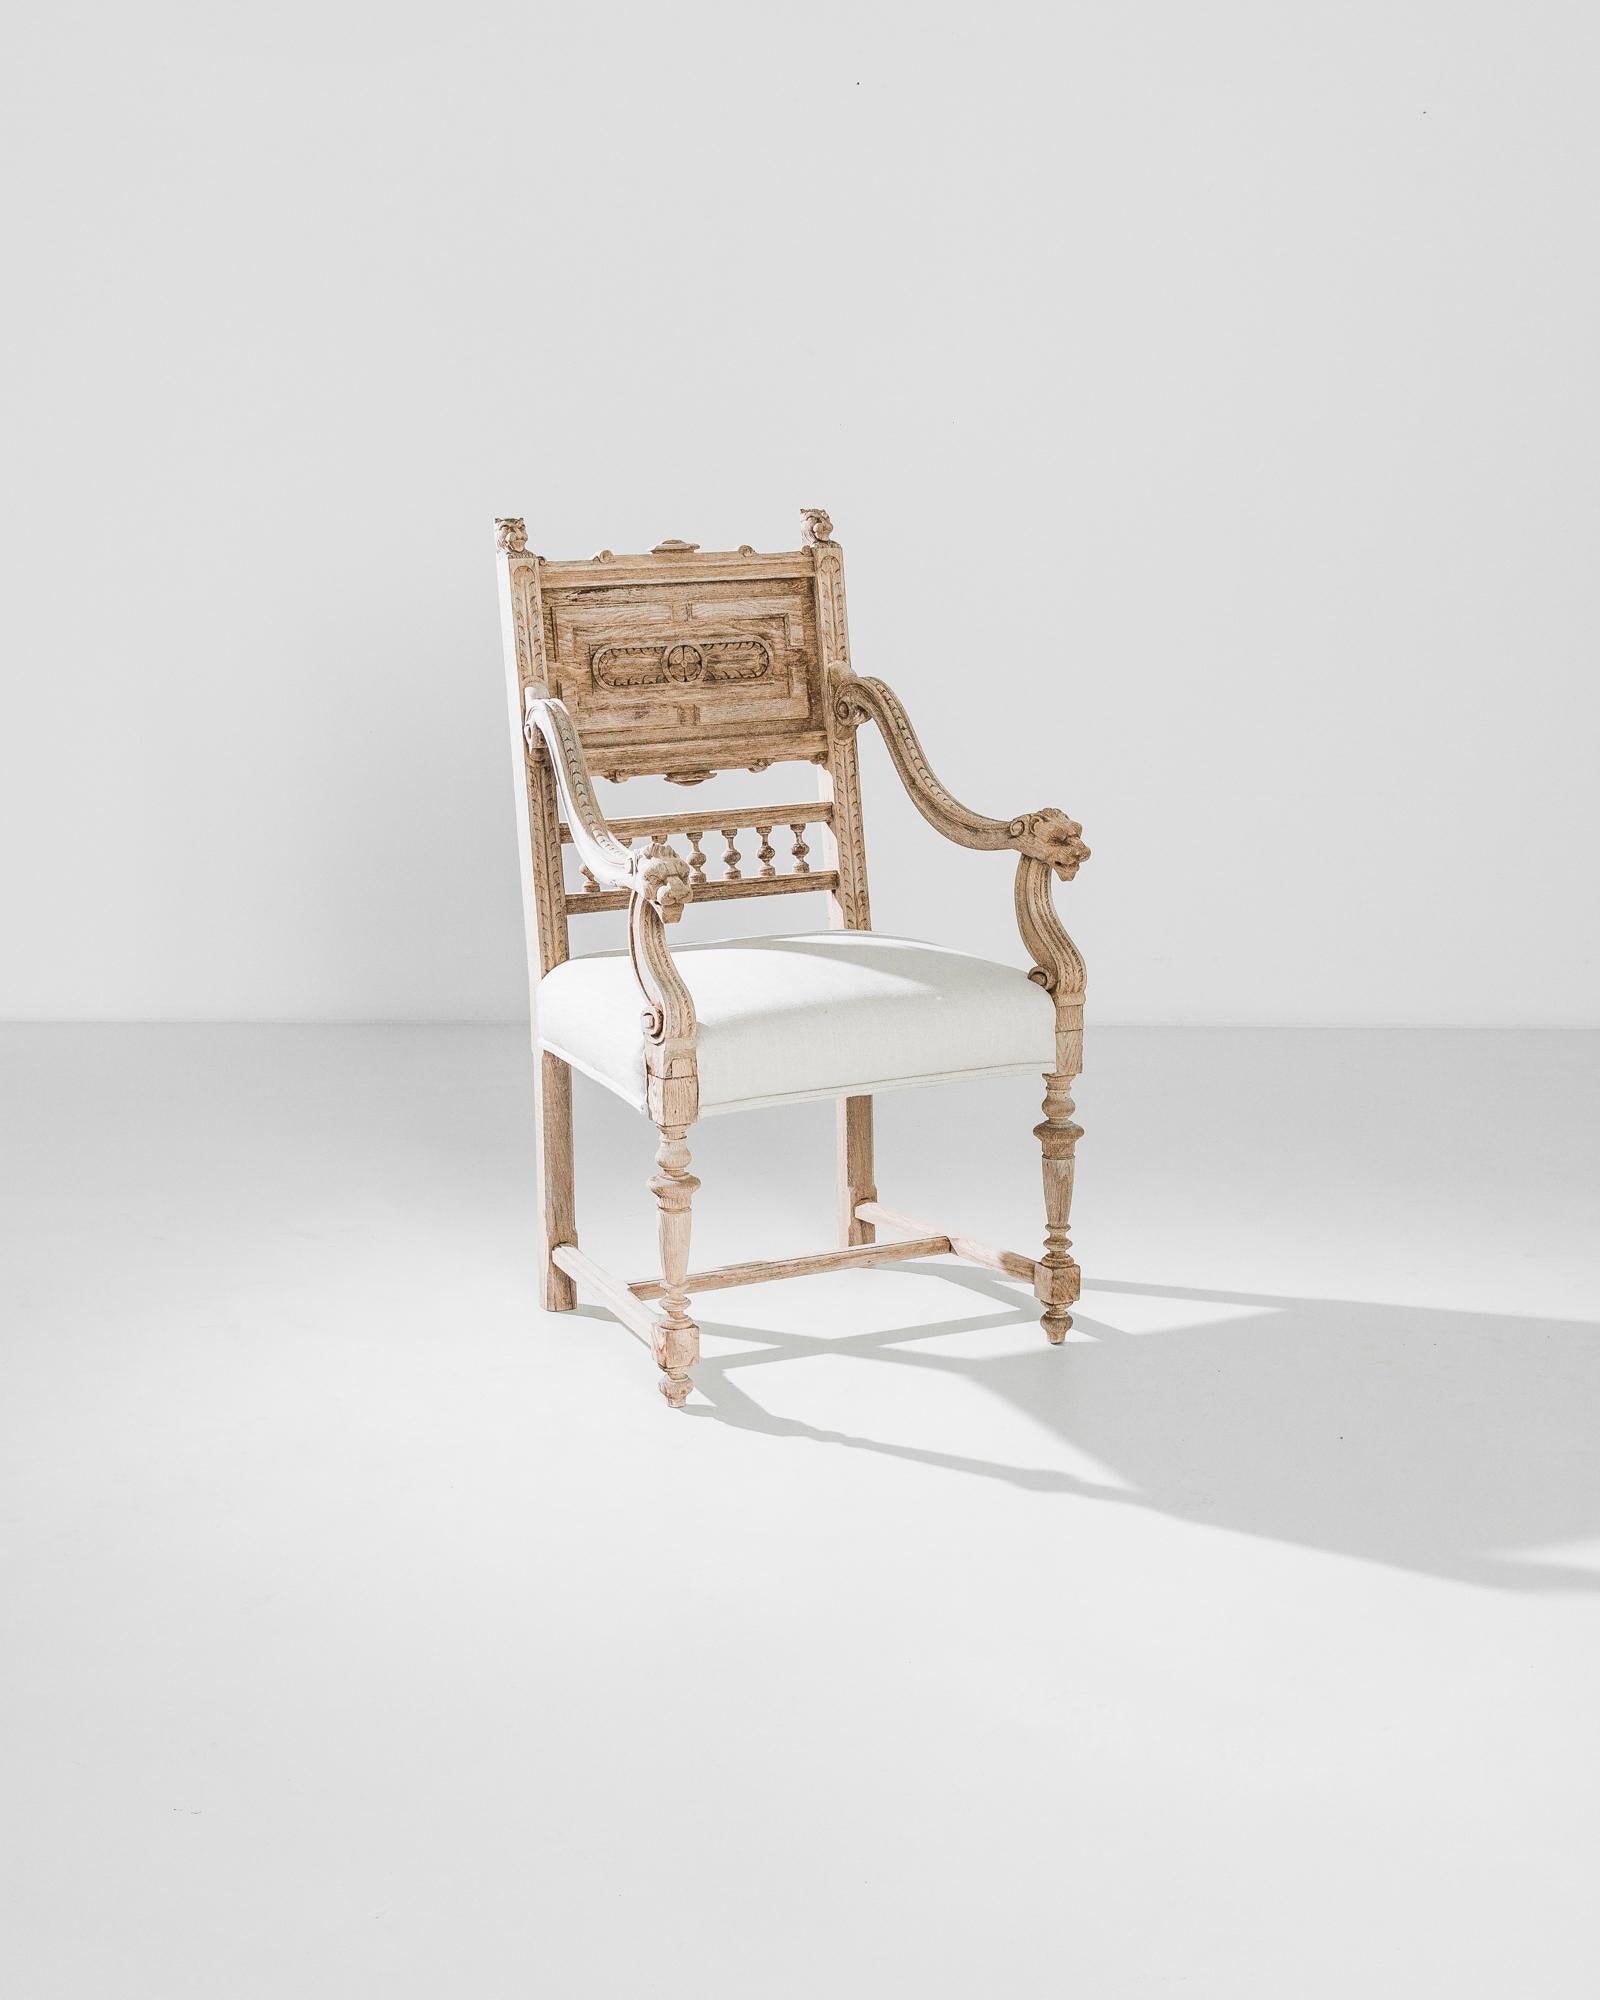 An oak armchair with upholstered seat from France, produced circa 1880. A regal armchair from the late 19th century, featuring an off-white cushion contrasted against richly carved blond wood. A highlight of this chair are the lion’s heads at the